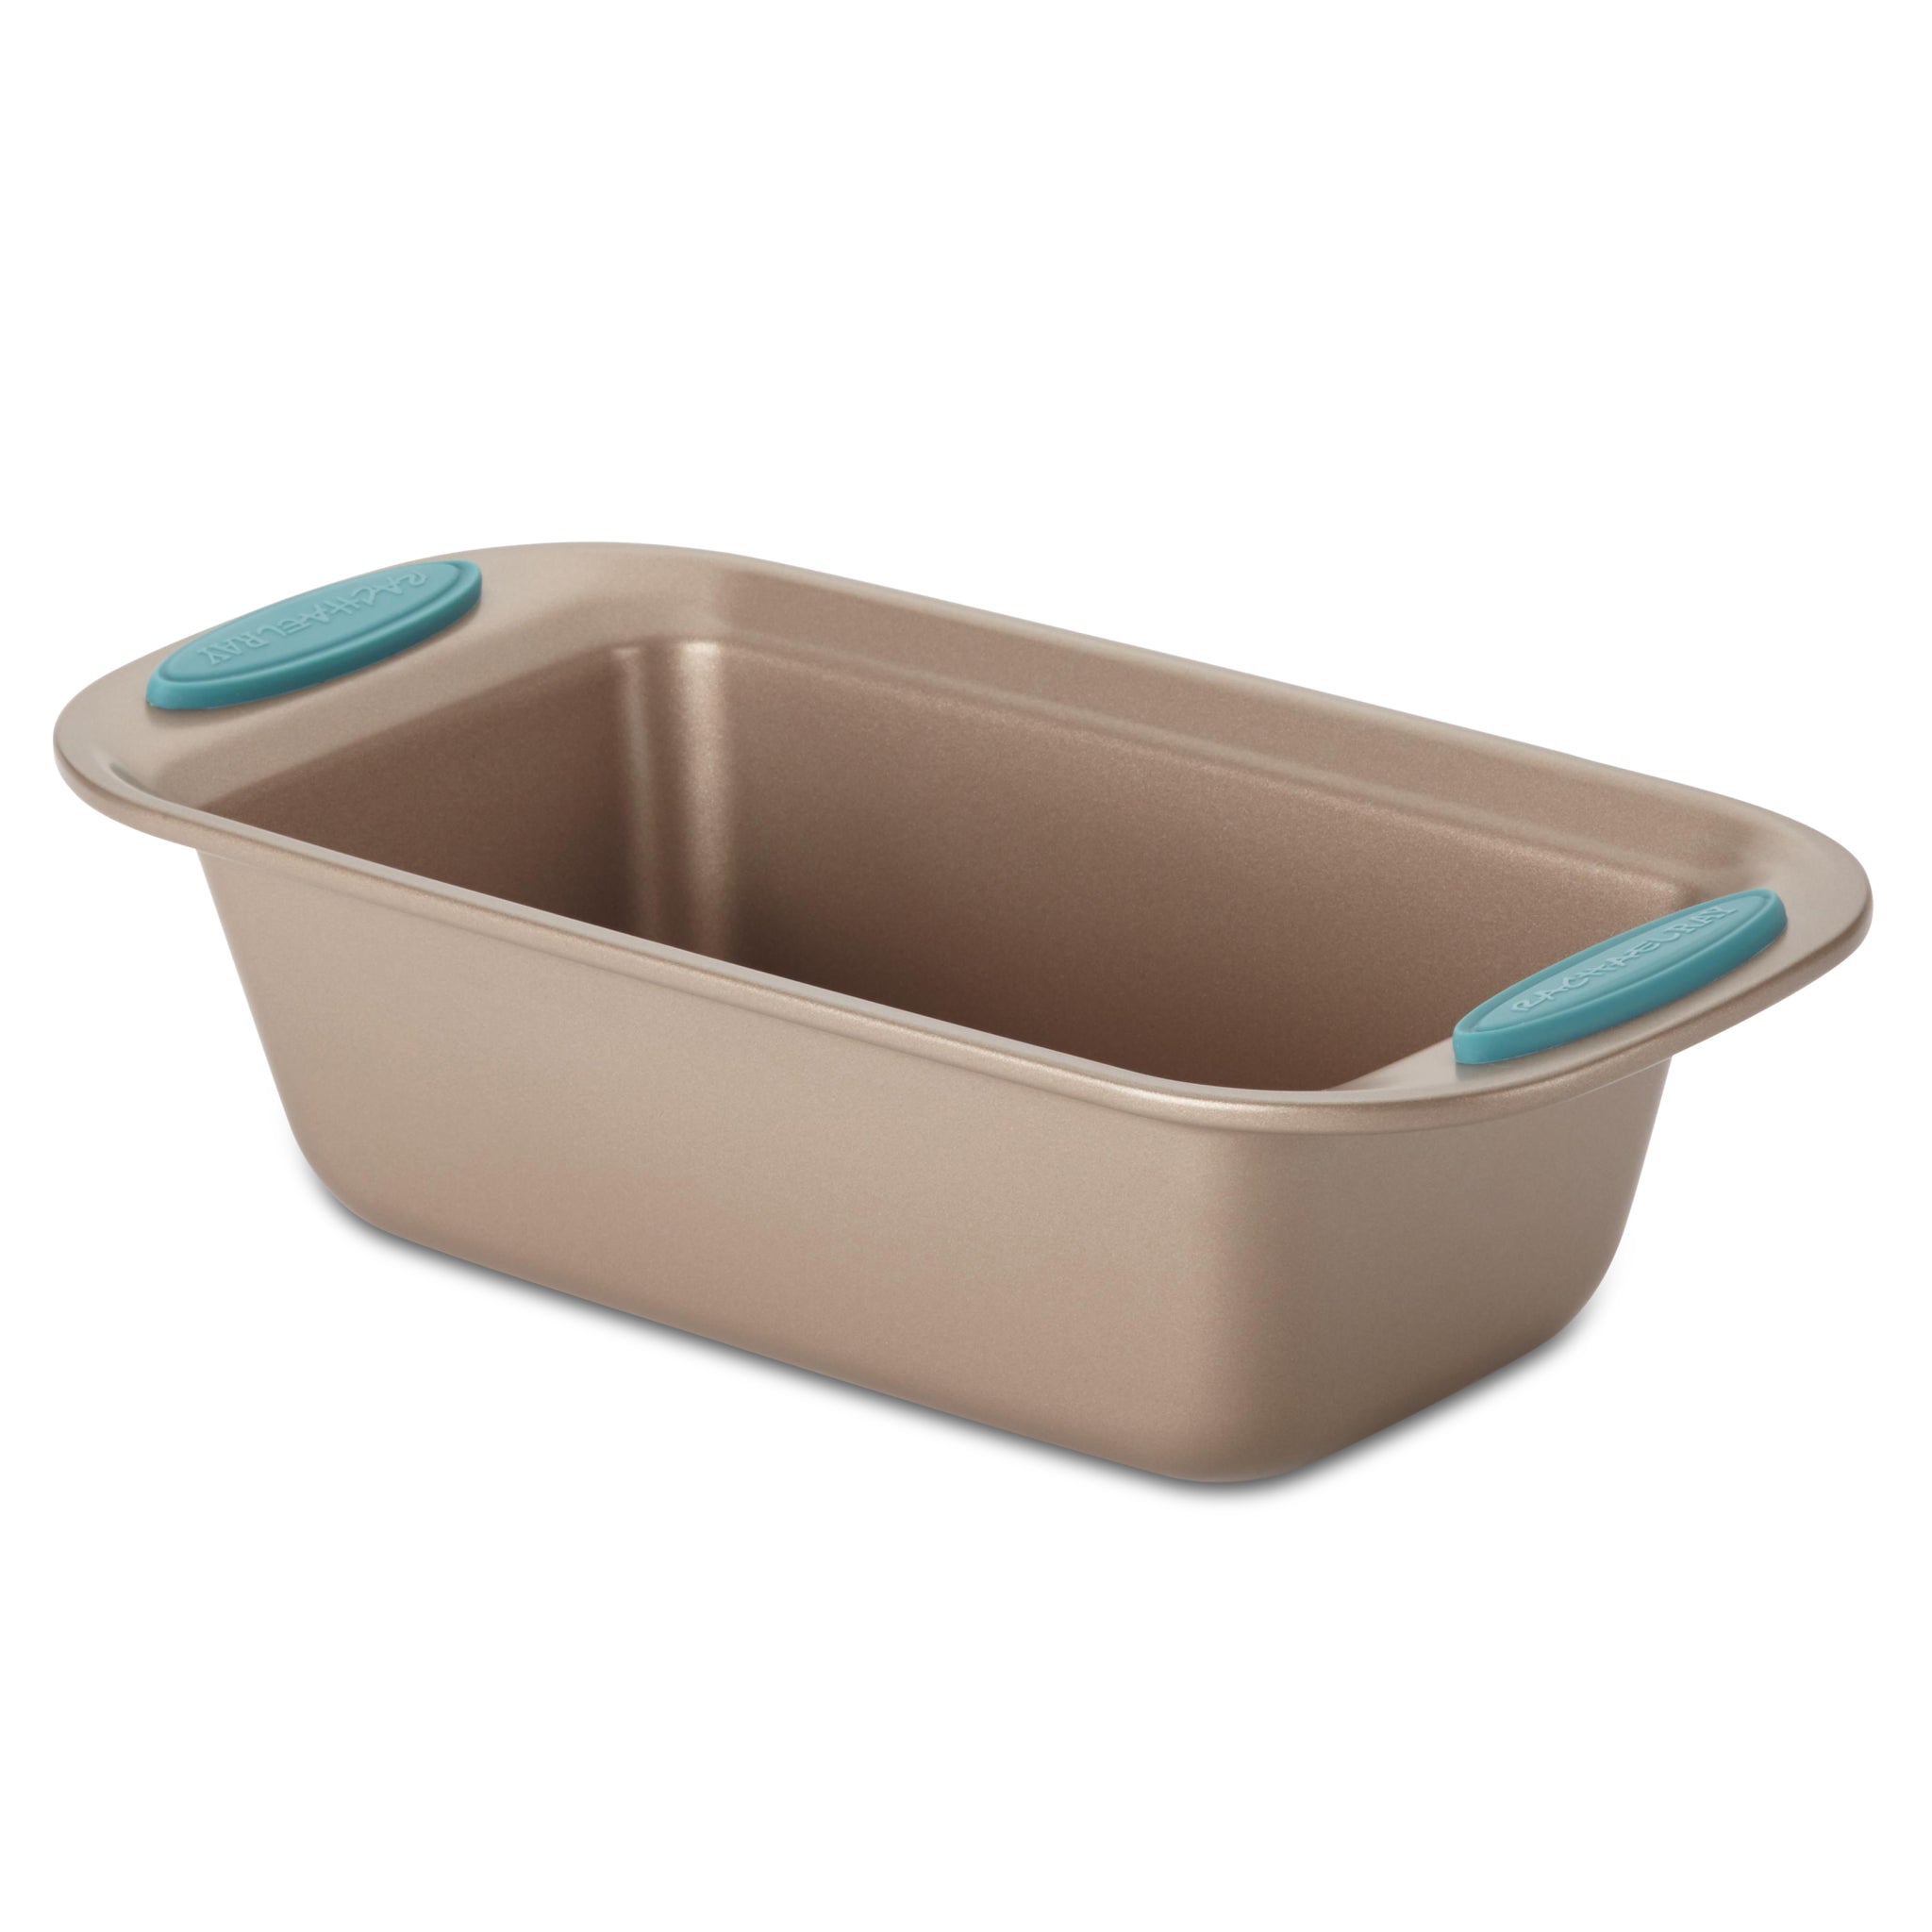 Rachael Ray Nonstick Bakeware 9 x 13-inch Grey with Orange Lid and Handles  Covered Cake Pan - Bed Bath & Beyond - 8891291